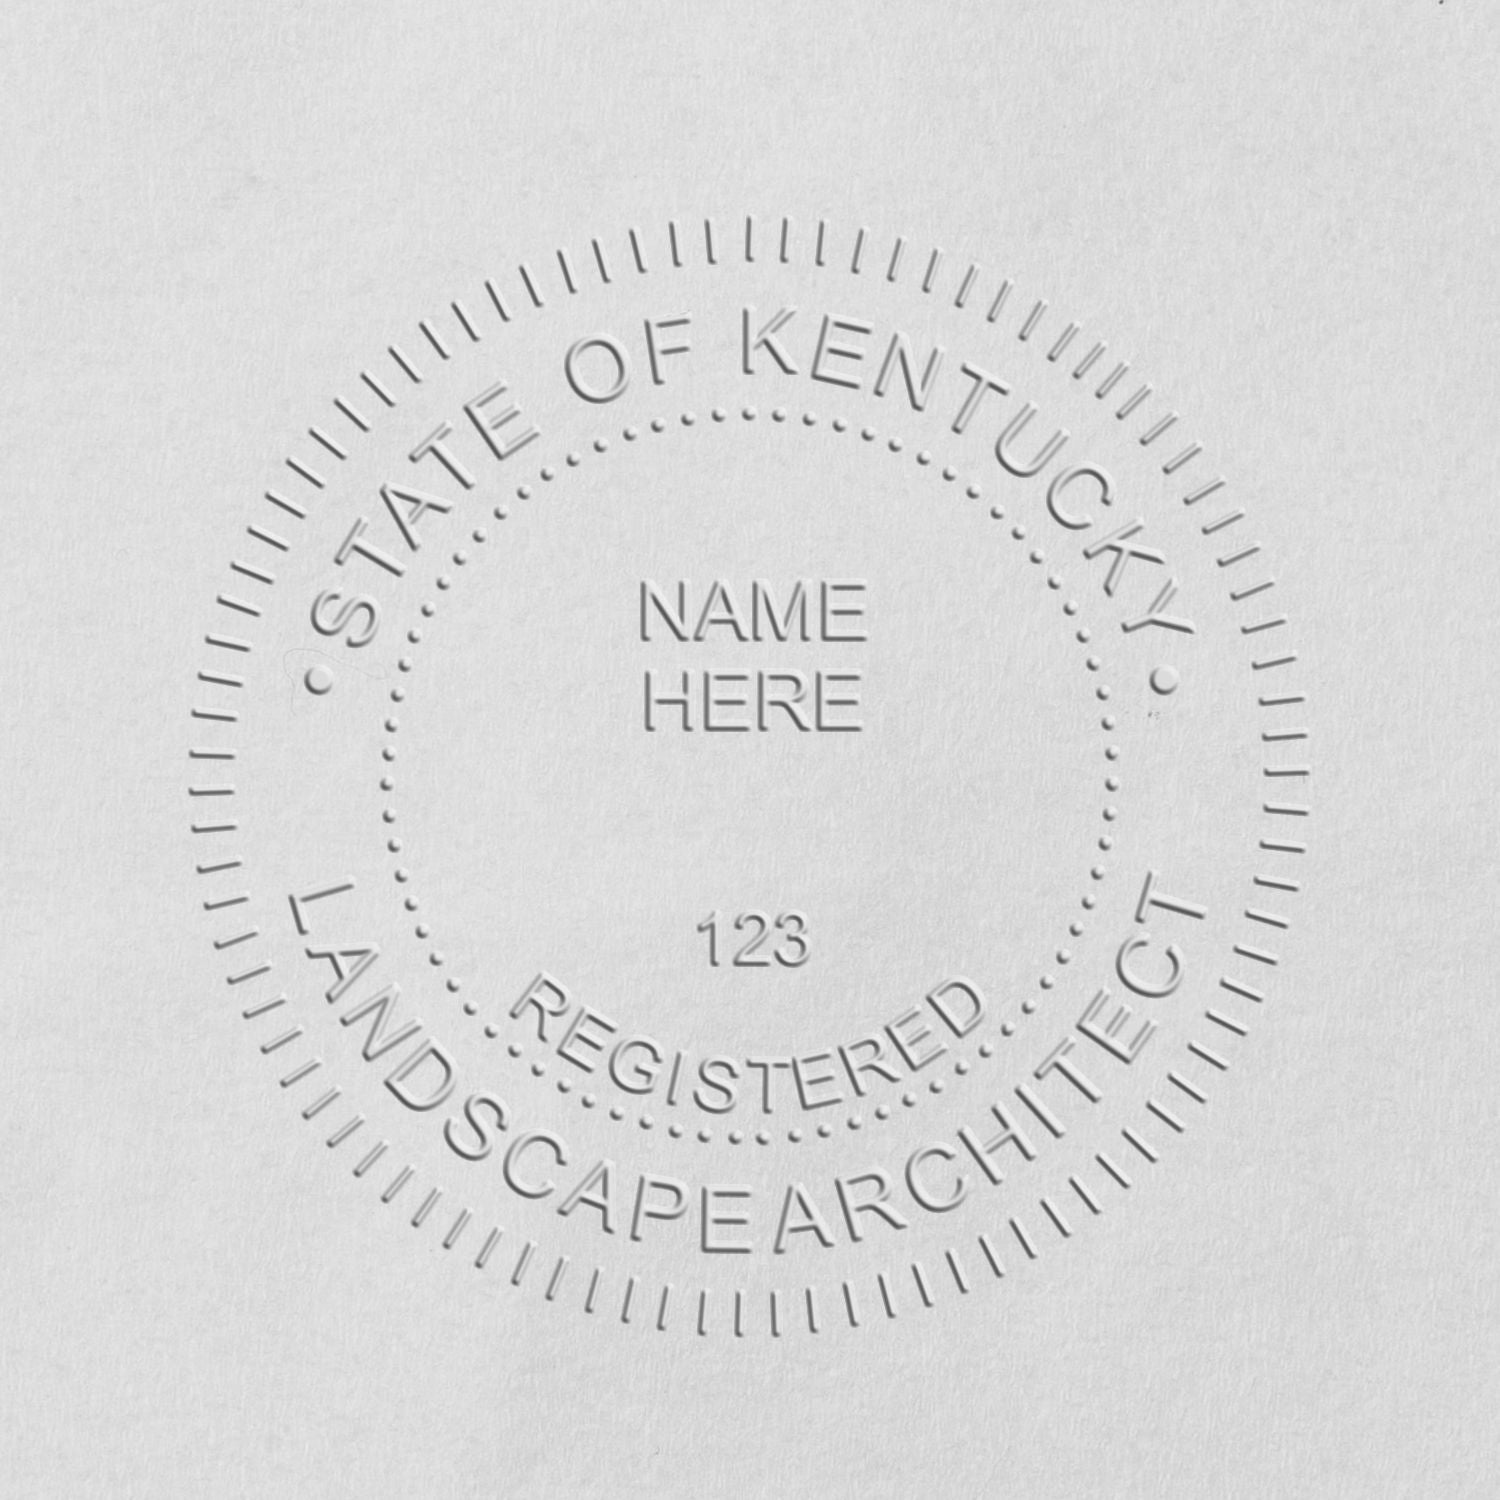 An alternative view of the Kentucky Long Reach Landscape Architect Embossing Stamp stamped on a sheet of paper showing the image in use